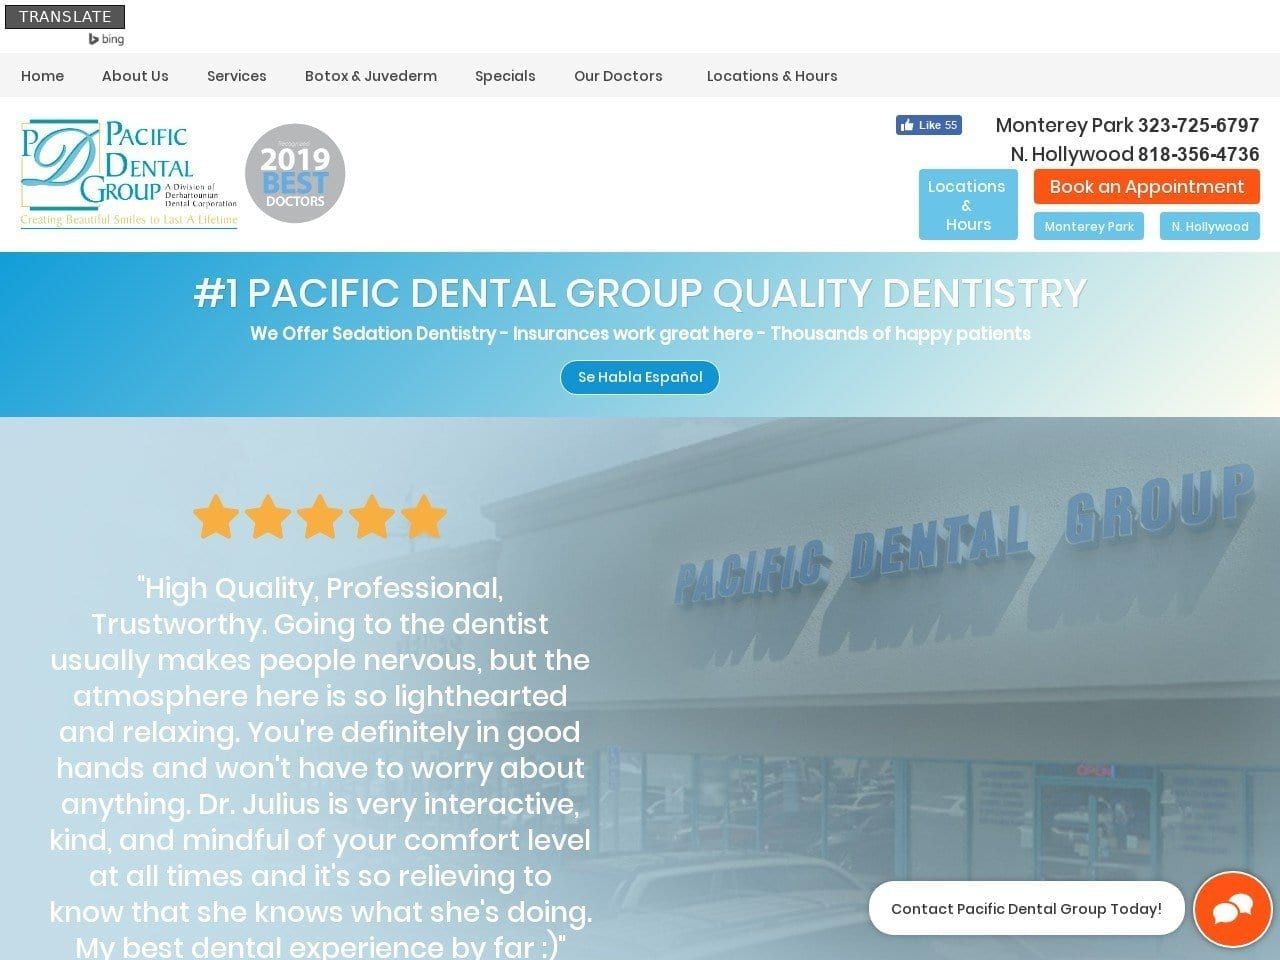 Pacific Dental Group Website Screenshot from pacificdentalgroup.com